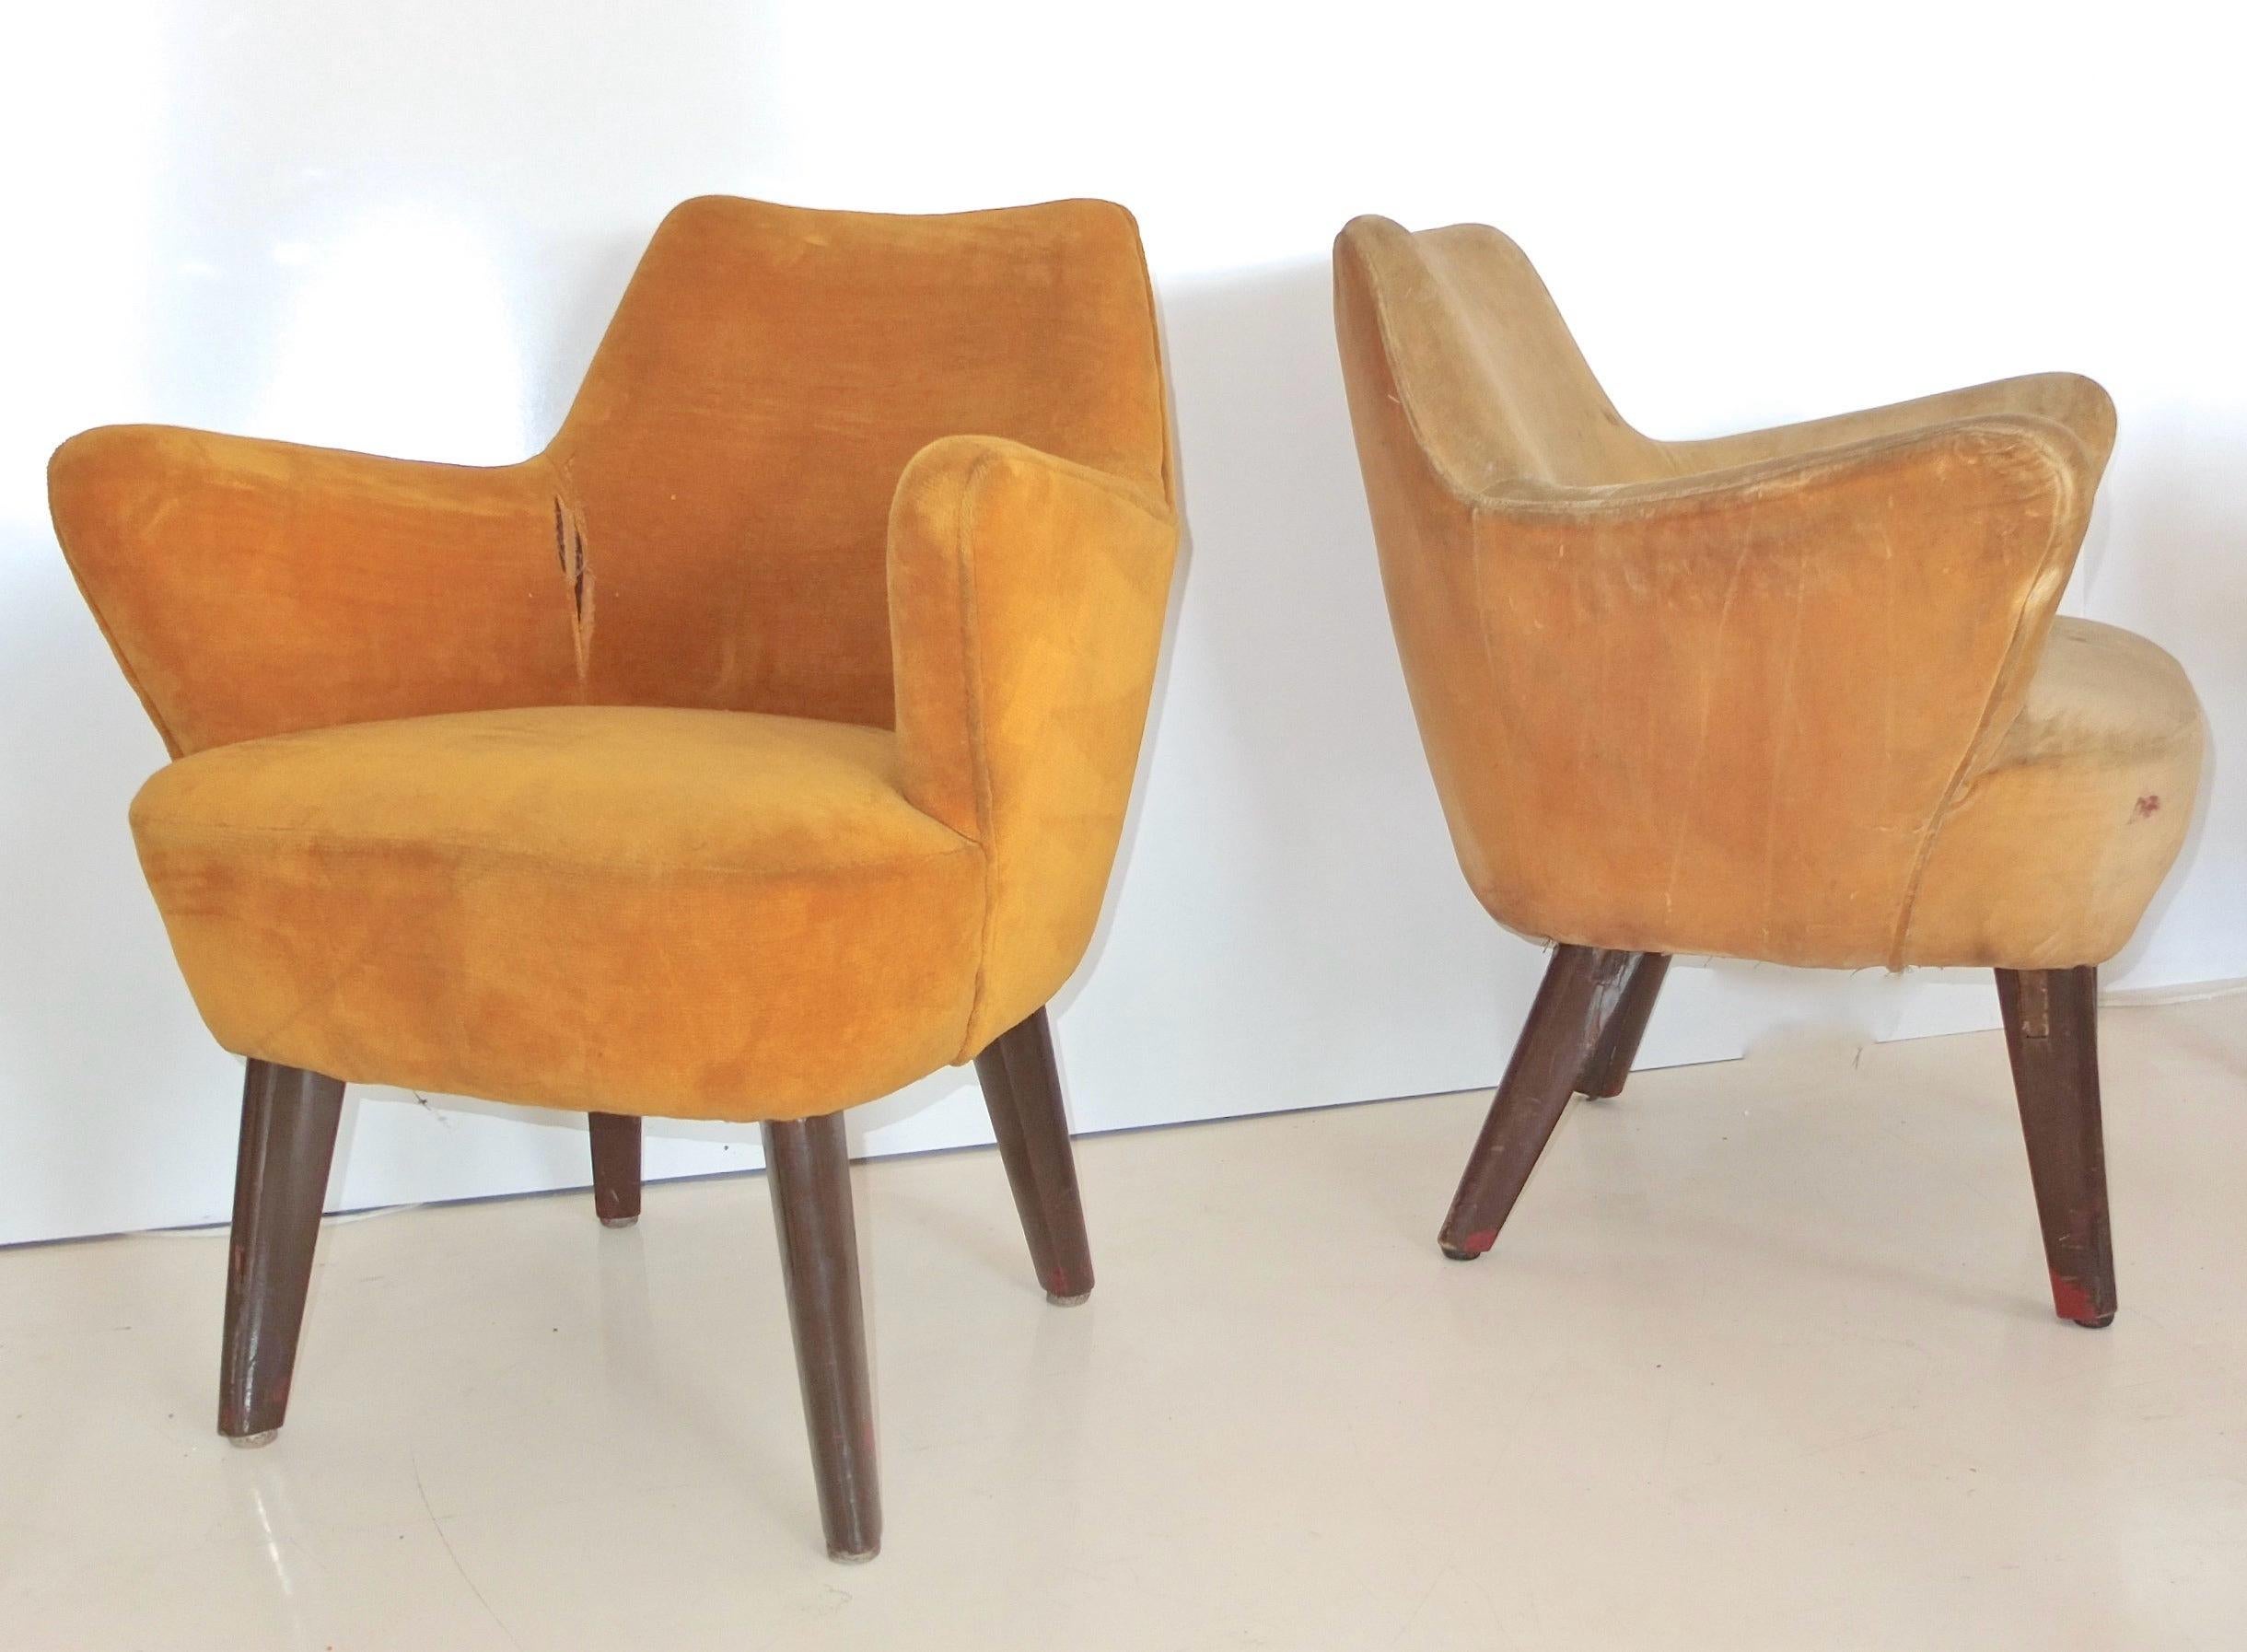 Gio Ponti Chairs from Augustus Ocean Liner - Pairs X3 For Sale 8